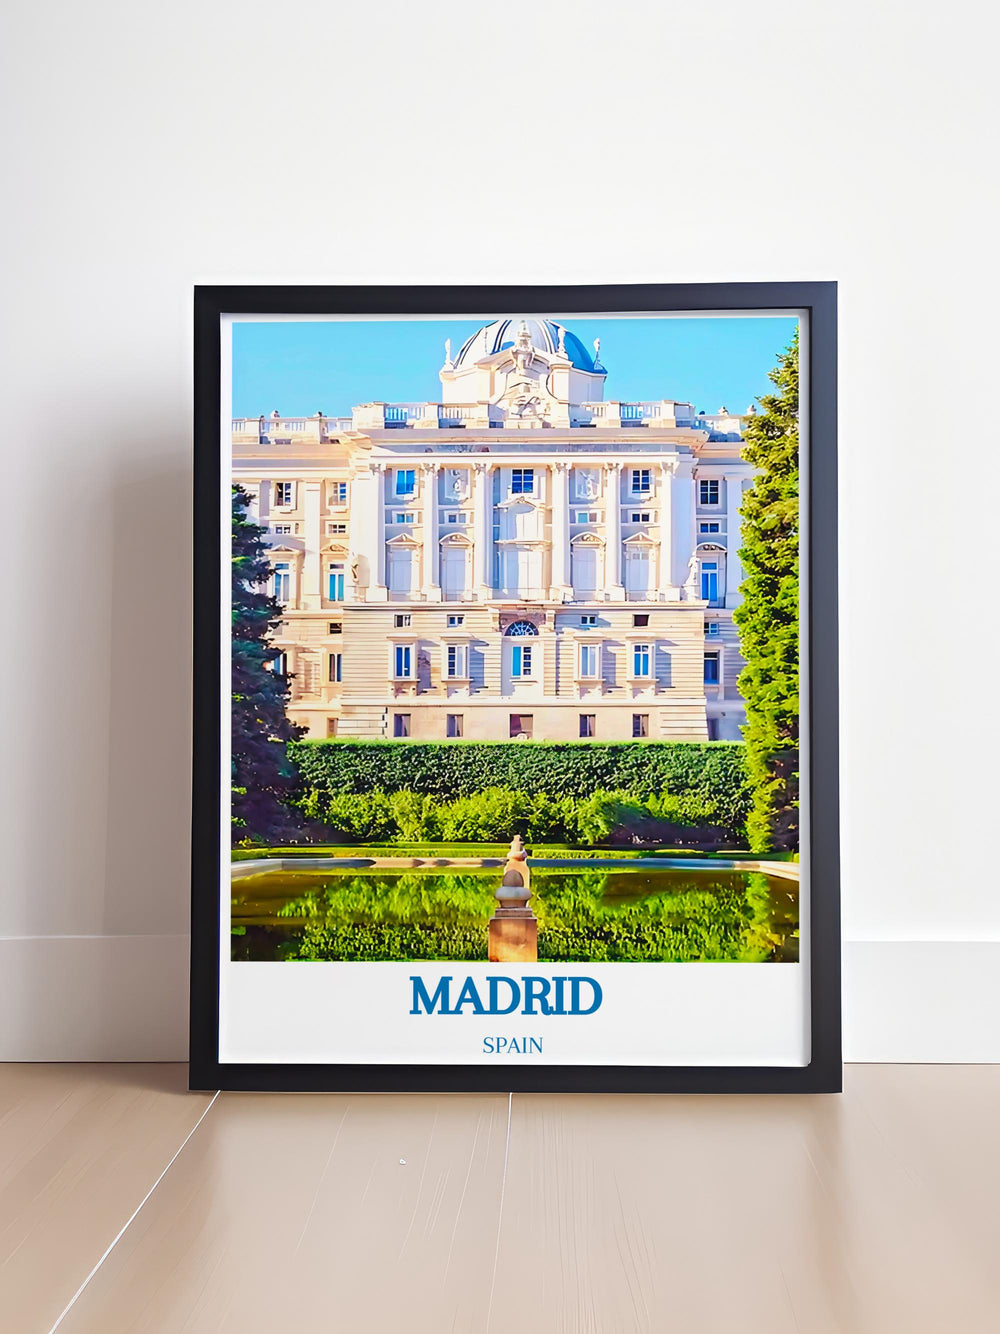 Palacio Real wall art capturing the architectural elegance of Madrids royal palace, ideal for historical art enthusiasts.